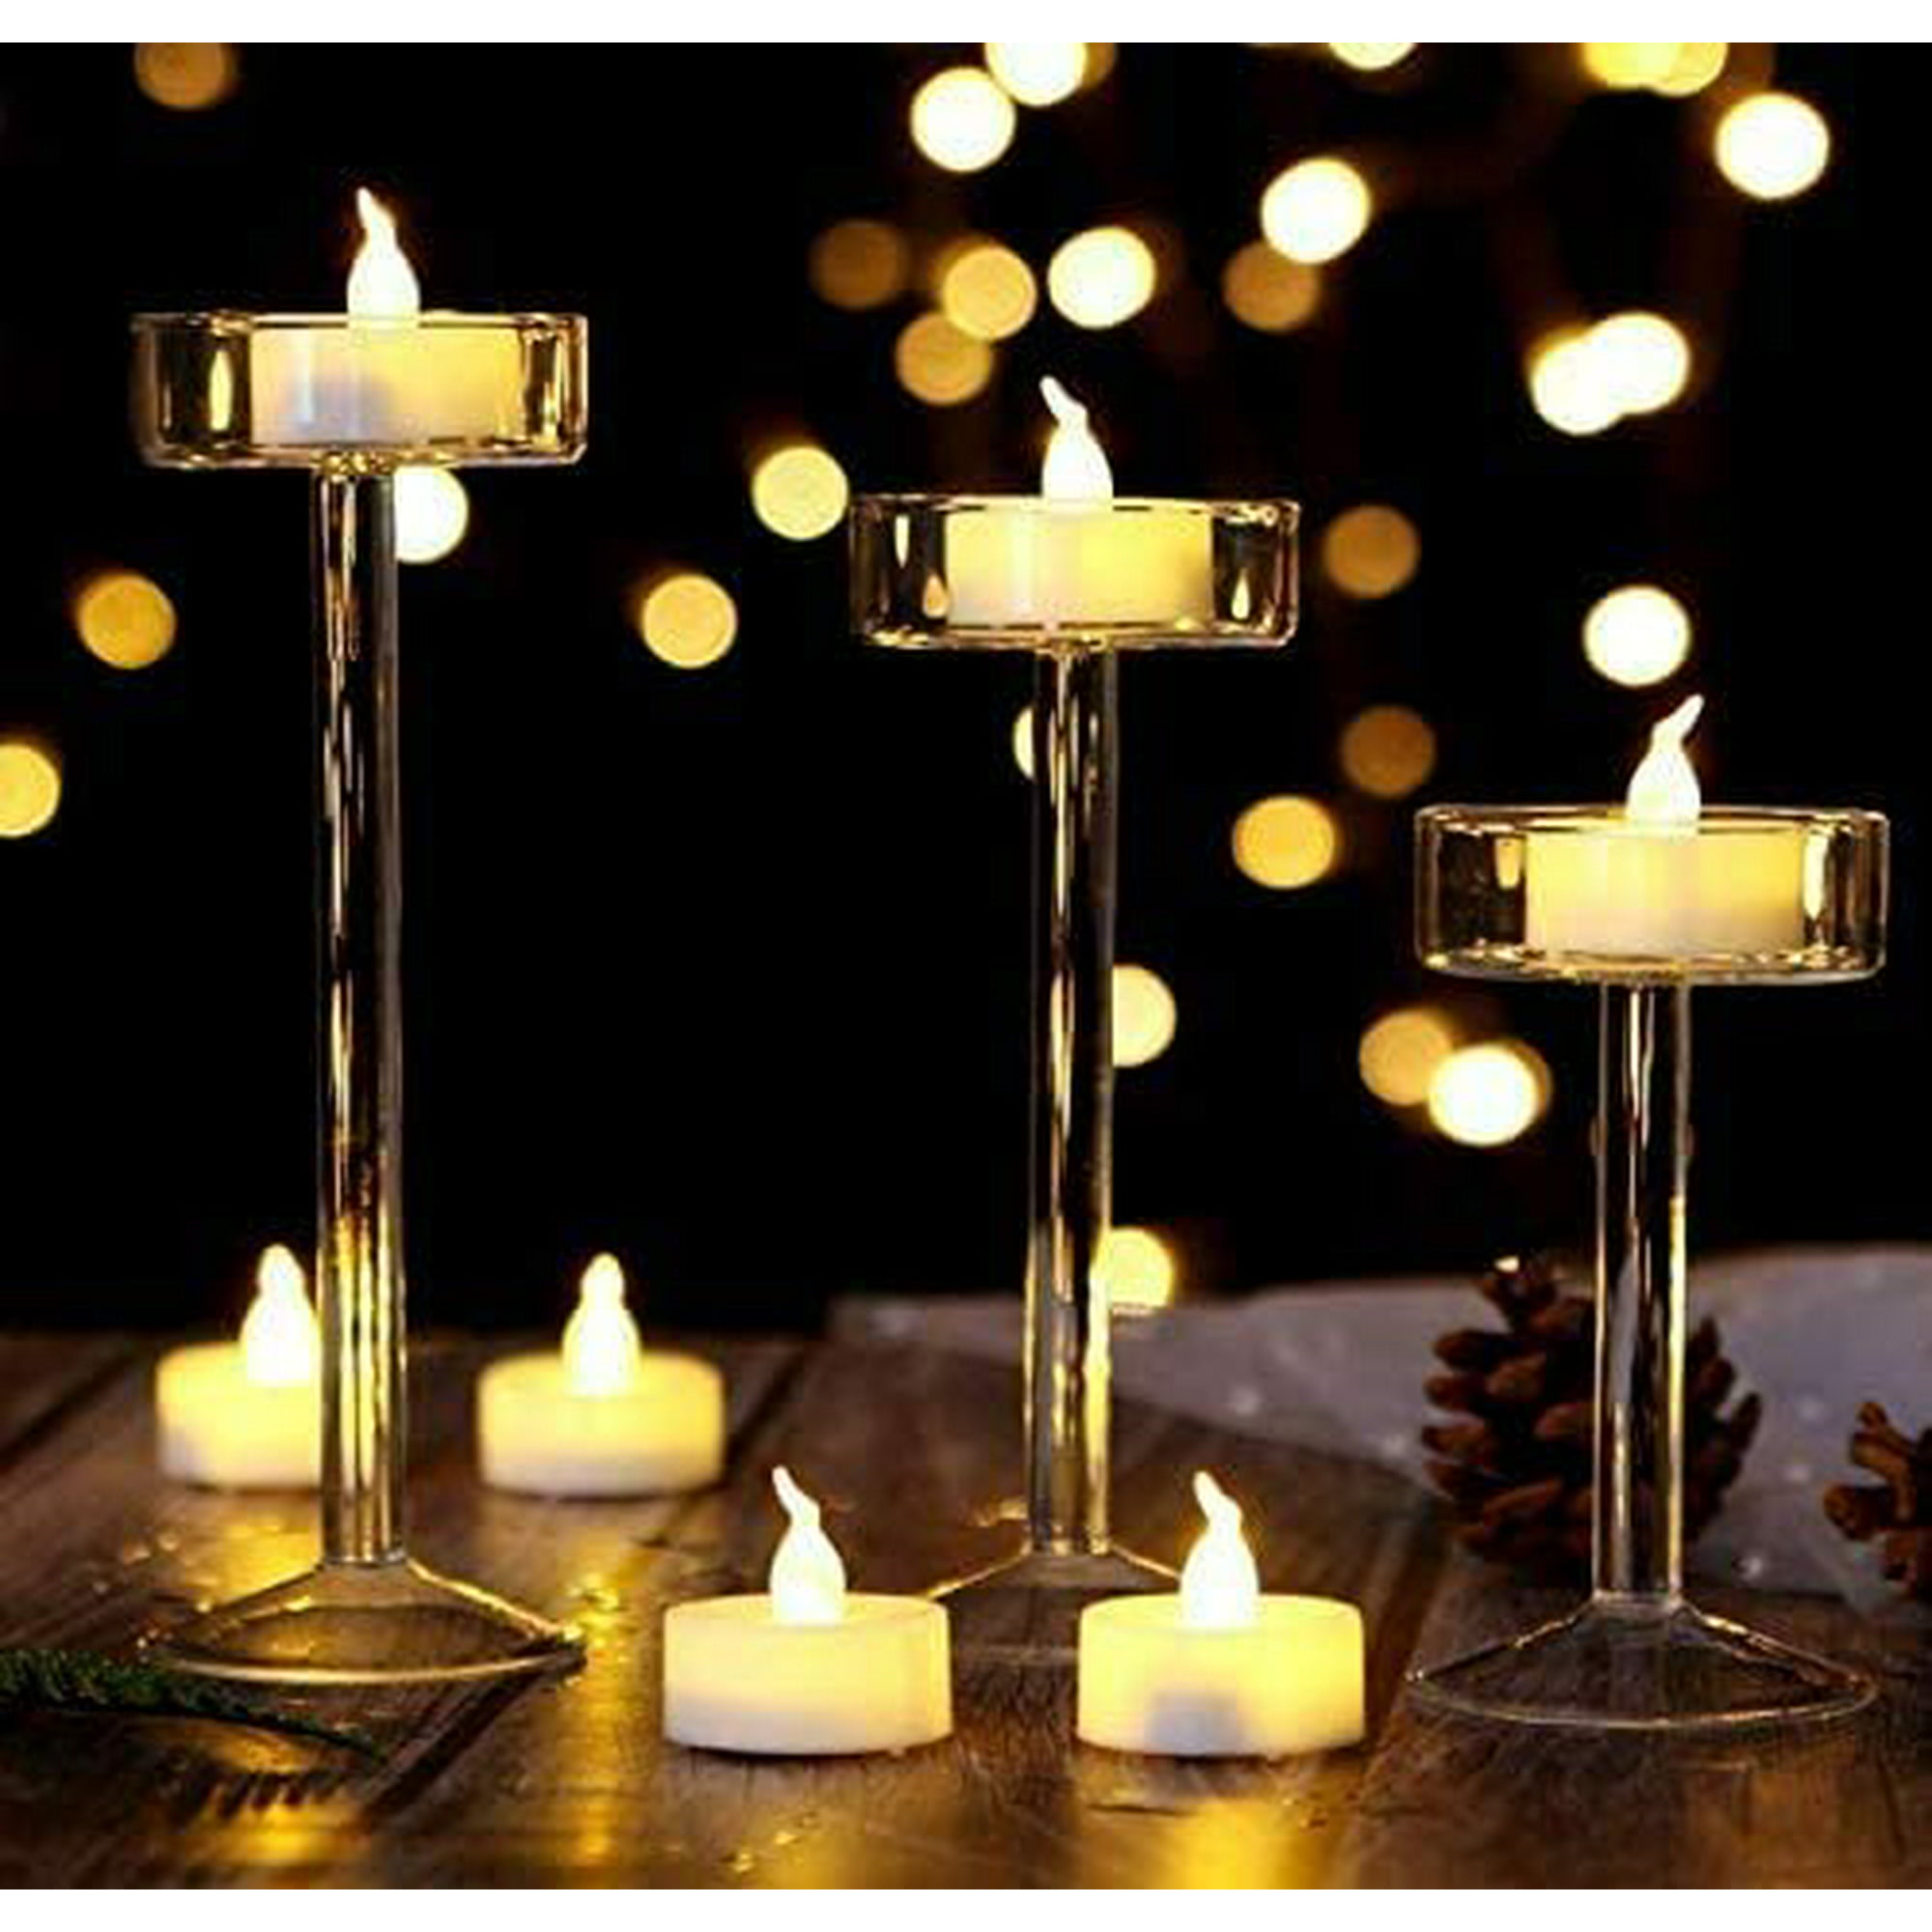 LED Real Wax Electric Unscented Candle Lights with Remote Control Set of 3 Large Pillar Fake Candles for Wedding Party Outdoor Votive Diwali Garden Flameless Battery Operated Flickering Candles